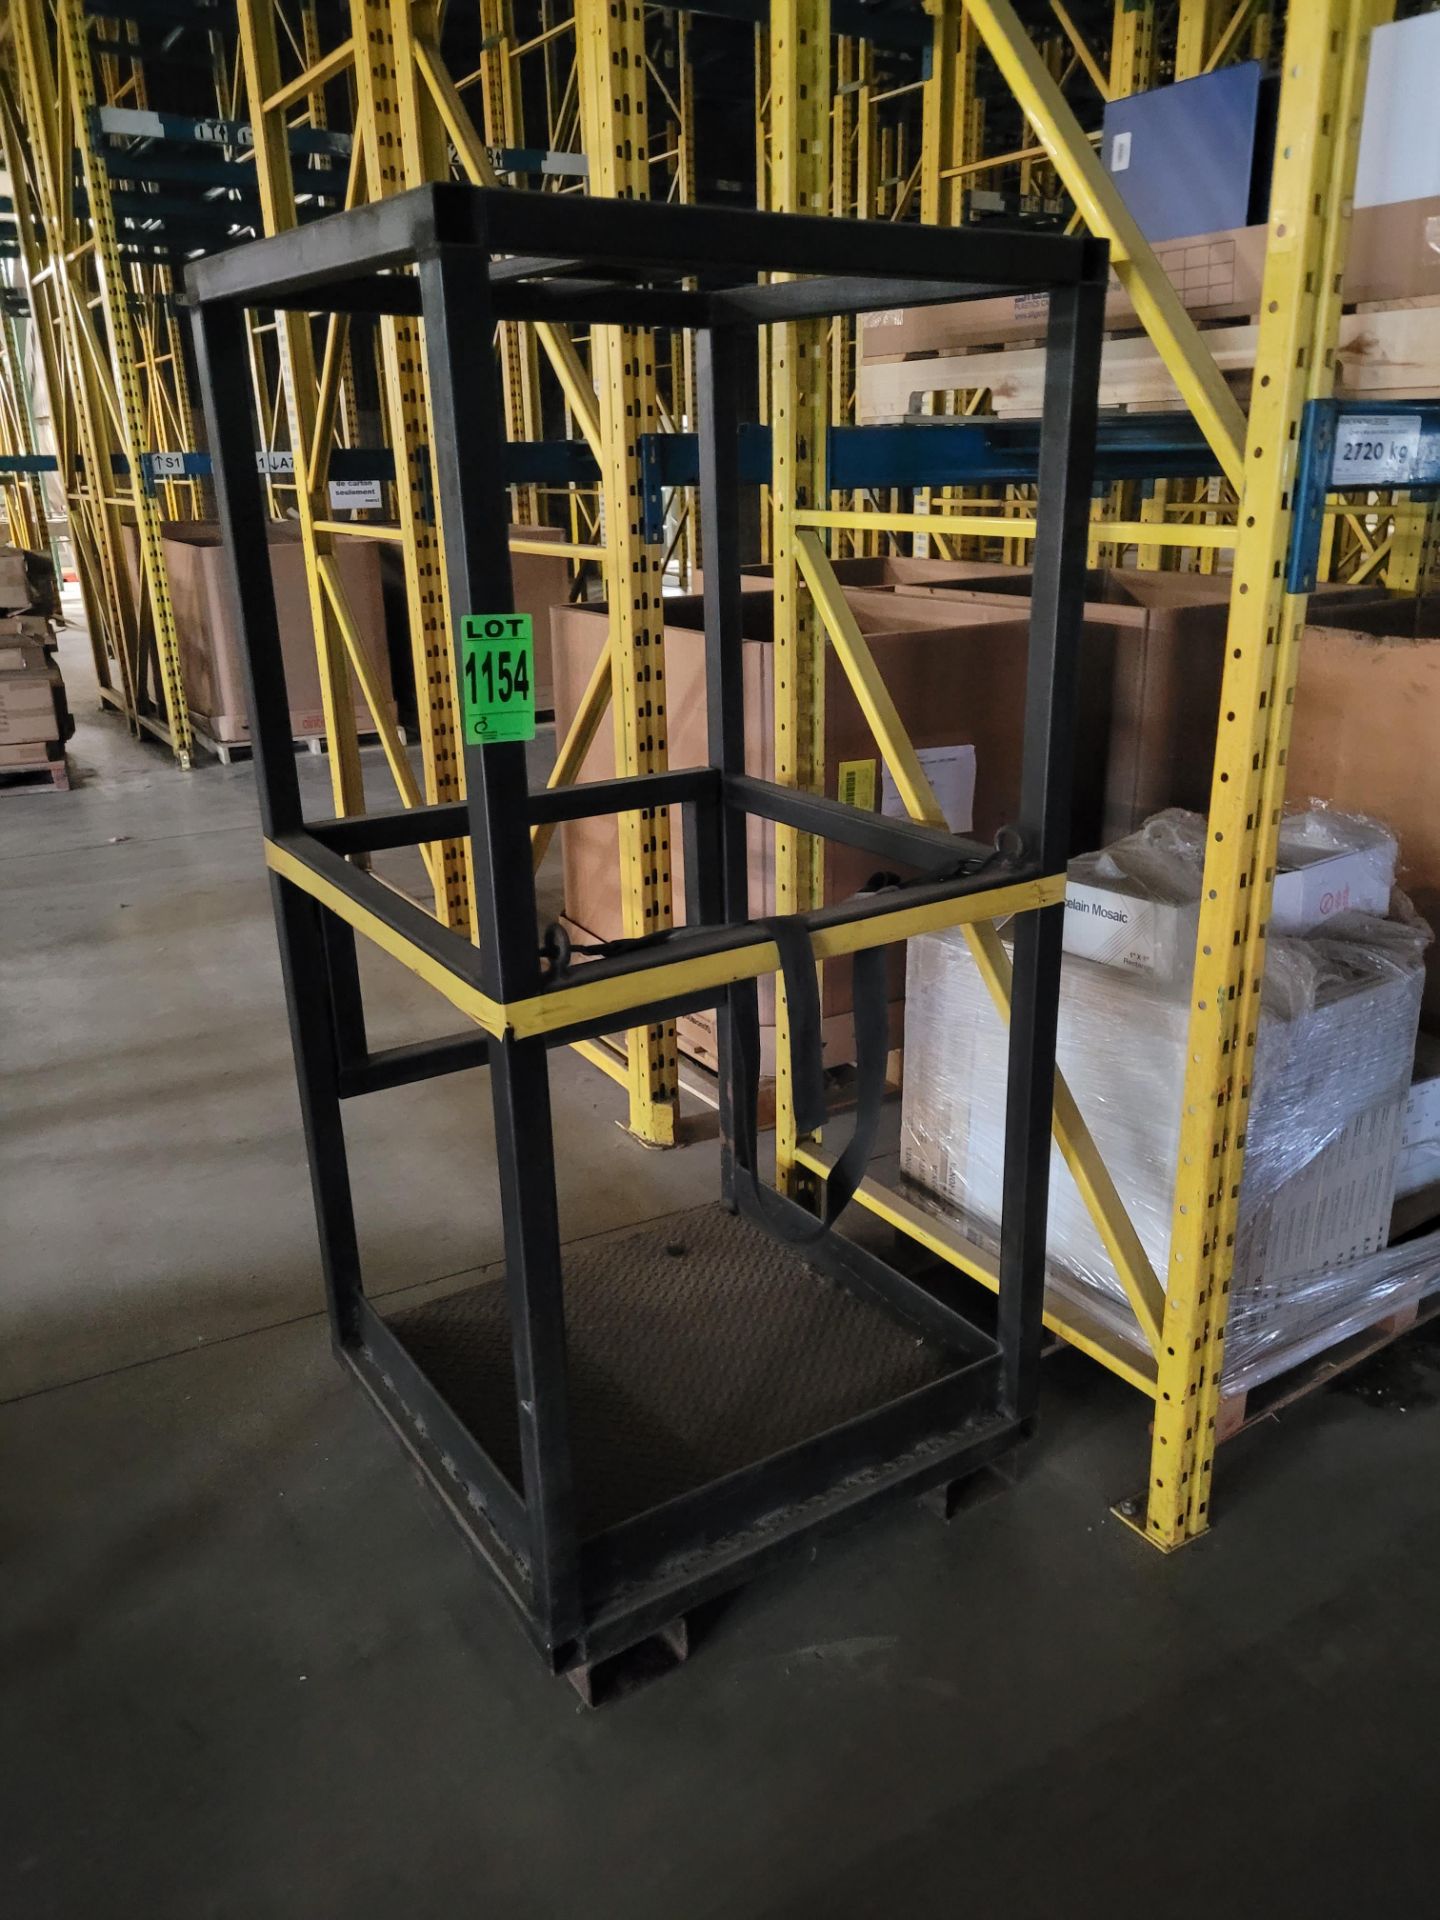 Forklift narrow lifting cage, 2.5' x 2.5' x 6'